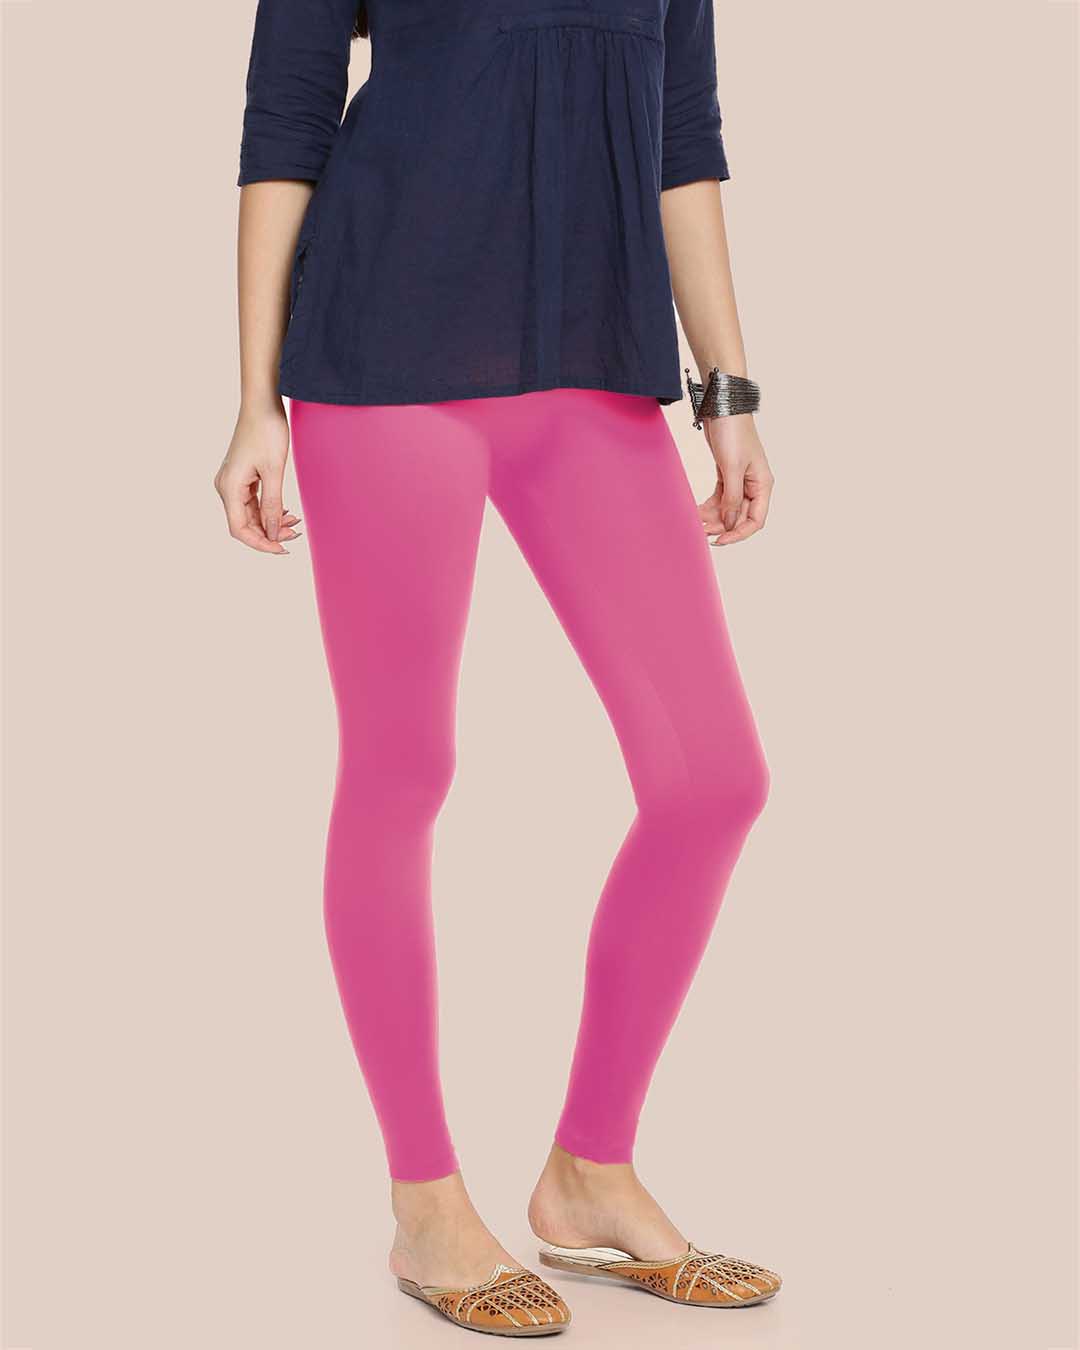 Mystic Pink Cotton Ankle Legging for Women